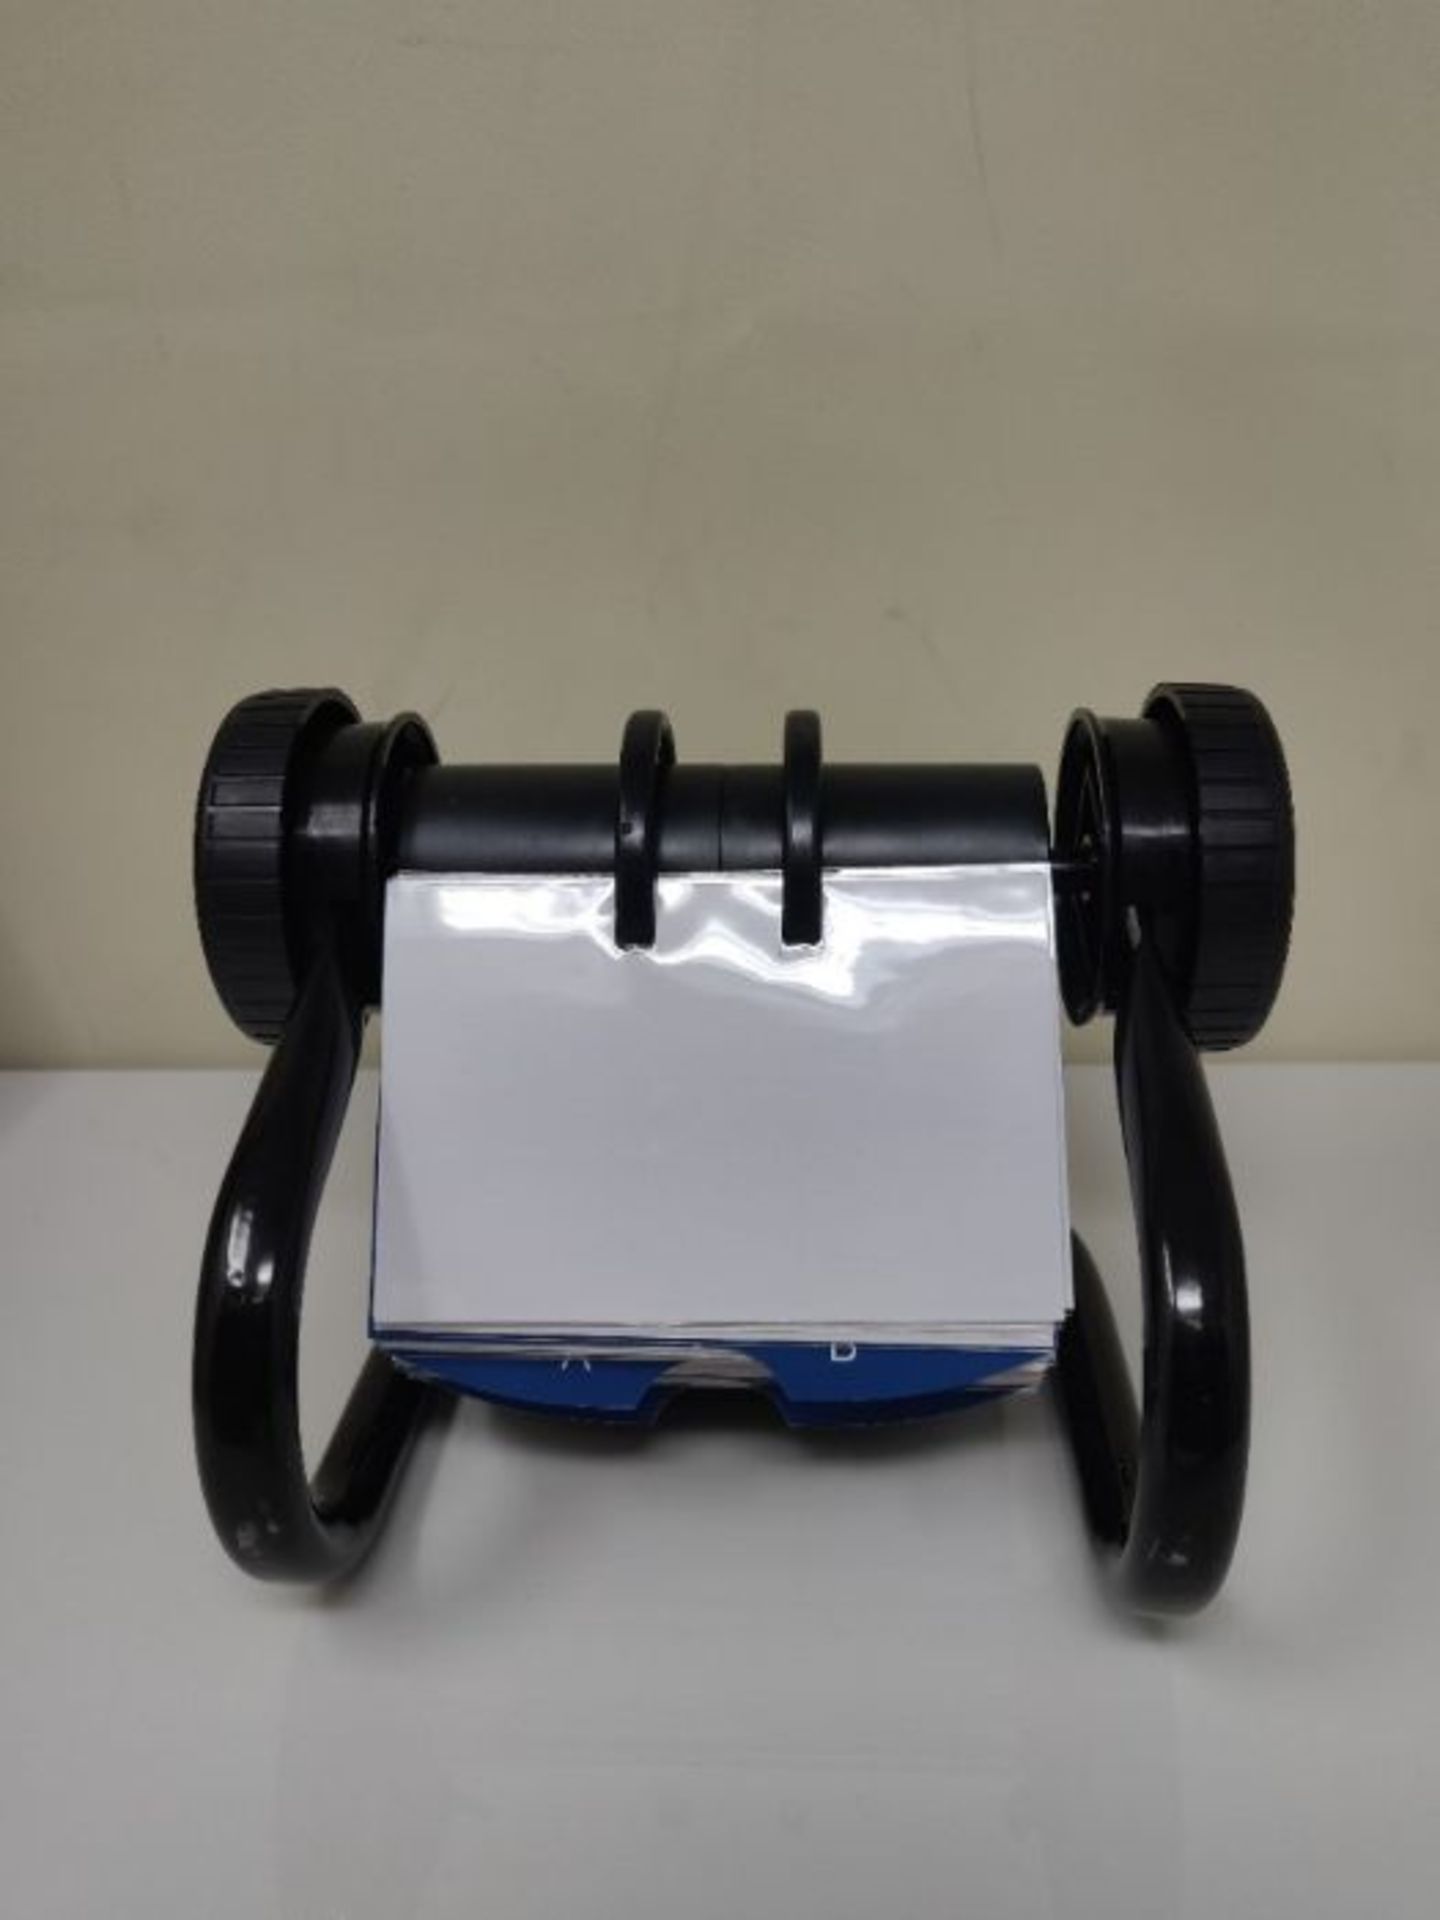 Rolodex Rotary Business card File Black Small - Image 3 of 3